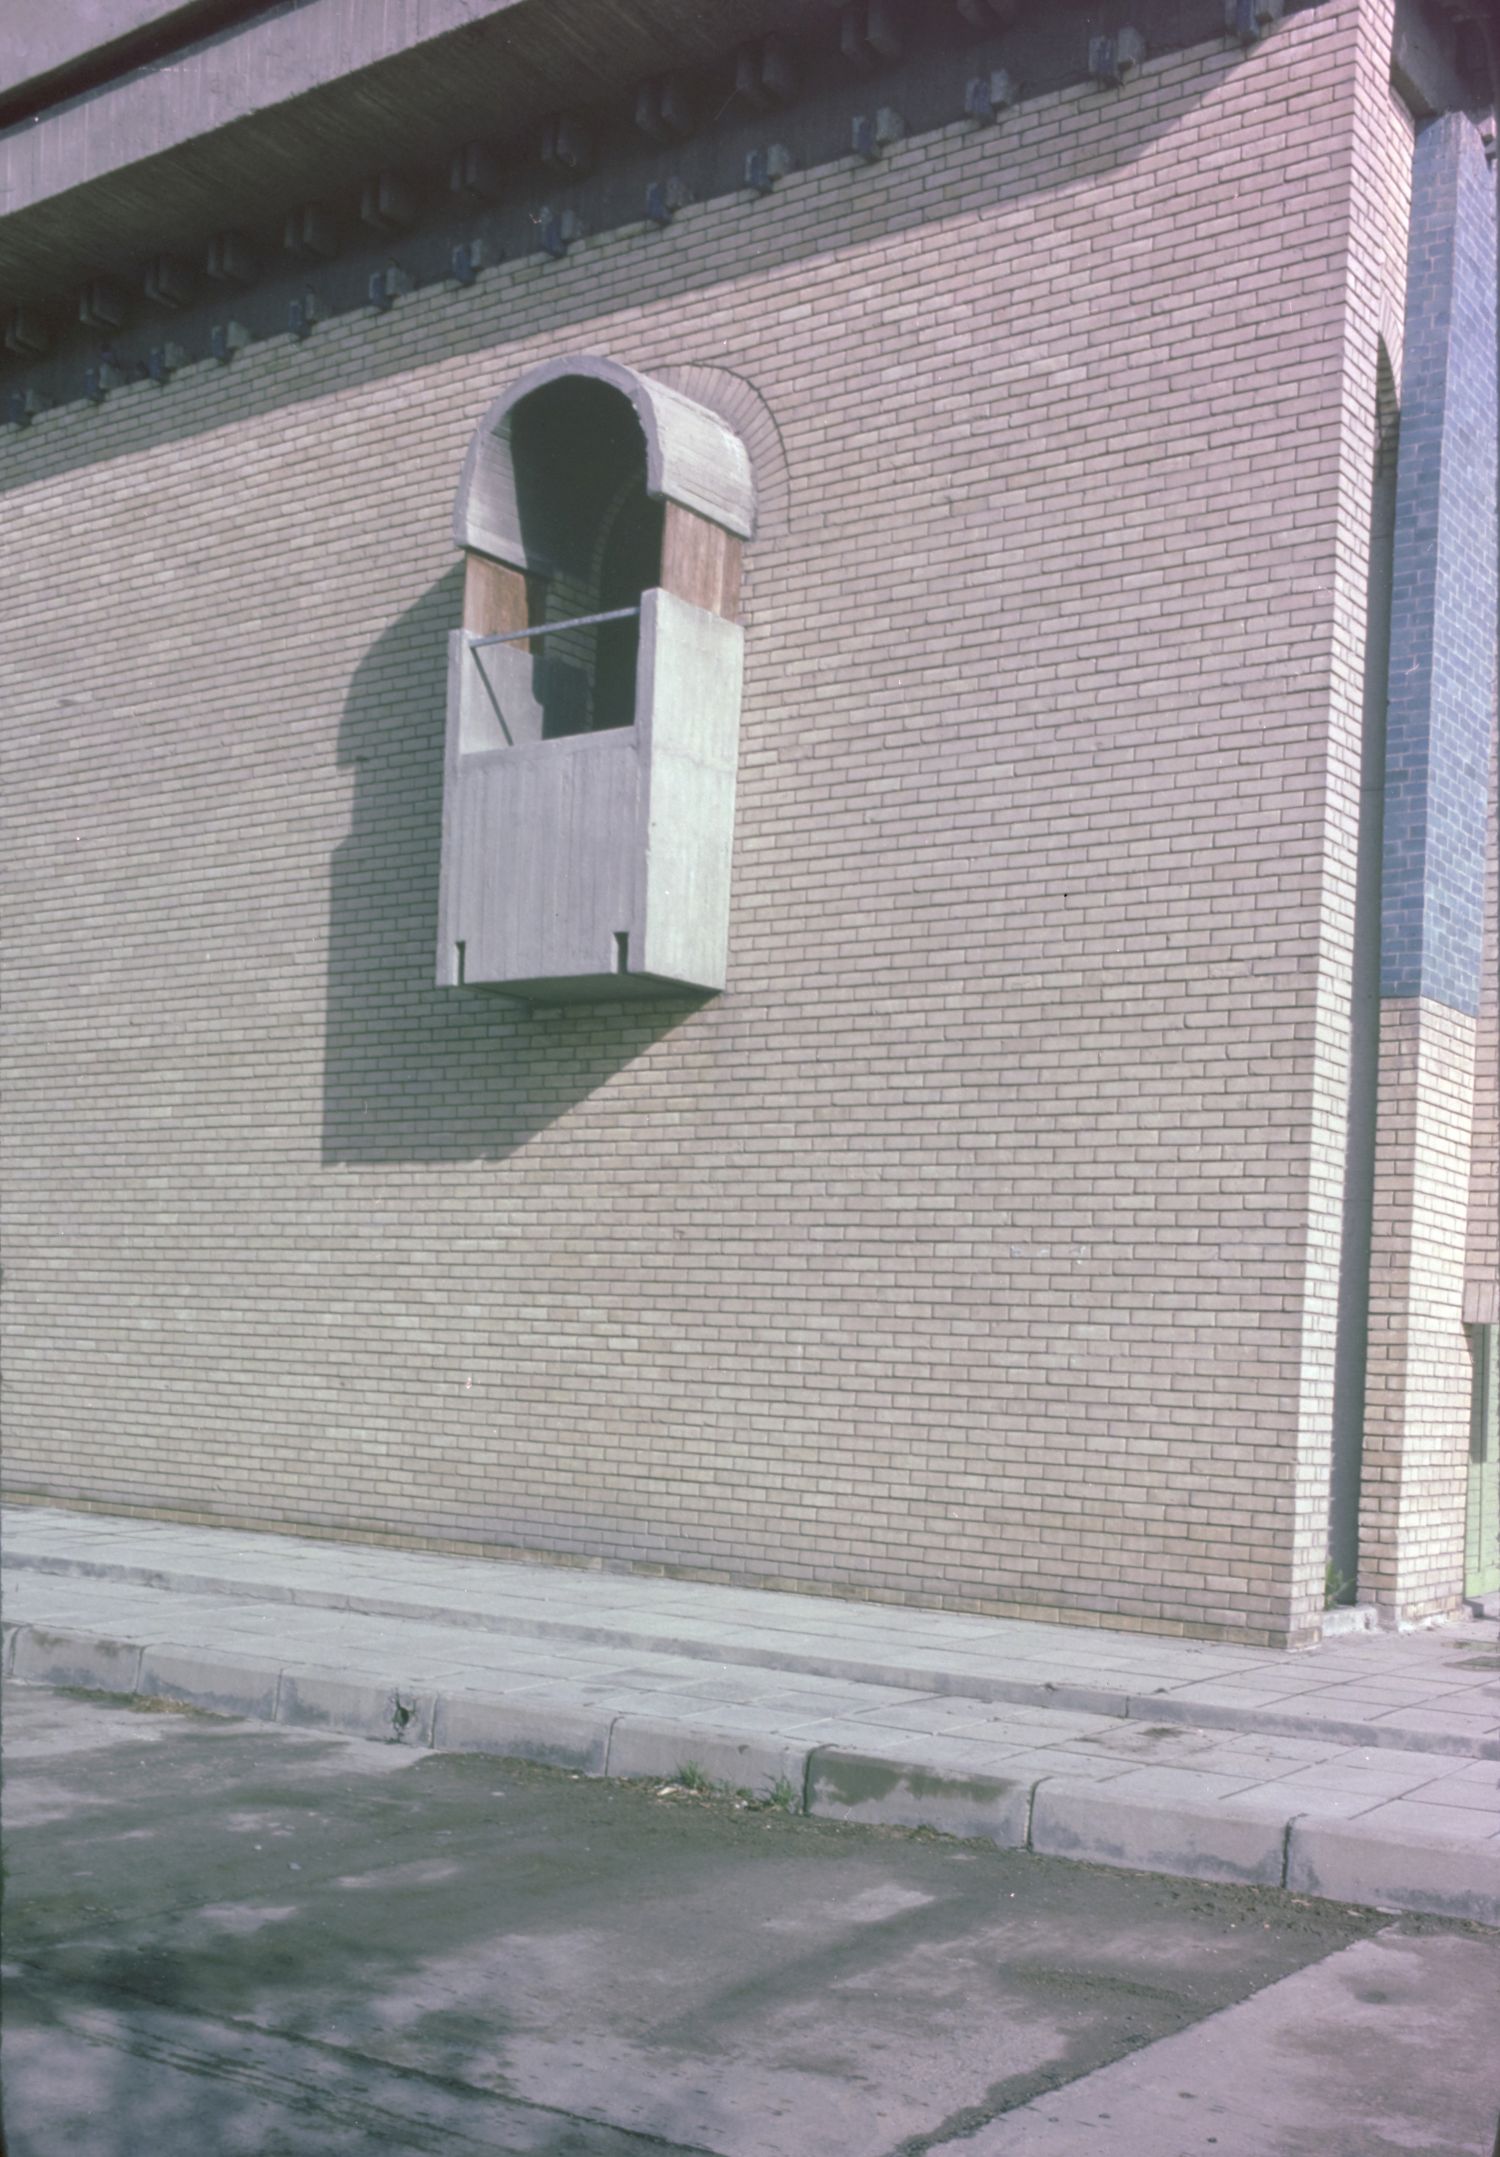 Iraqi Scientific Academy Building - View of second story window on southeast facade.